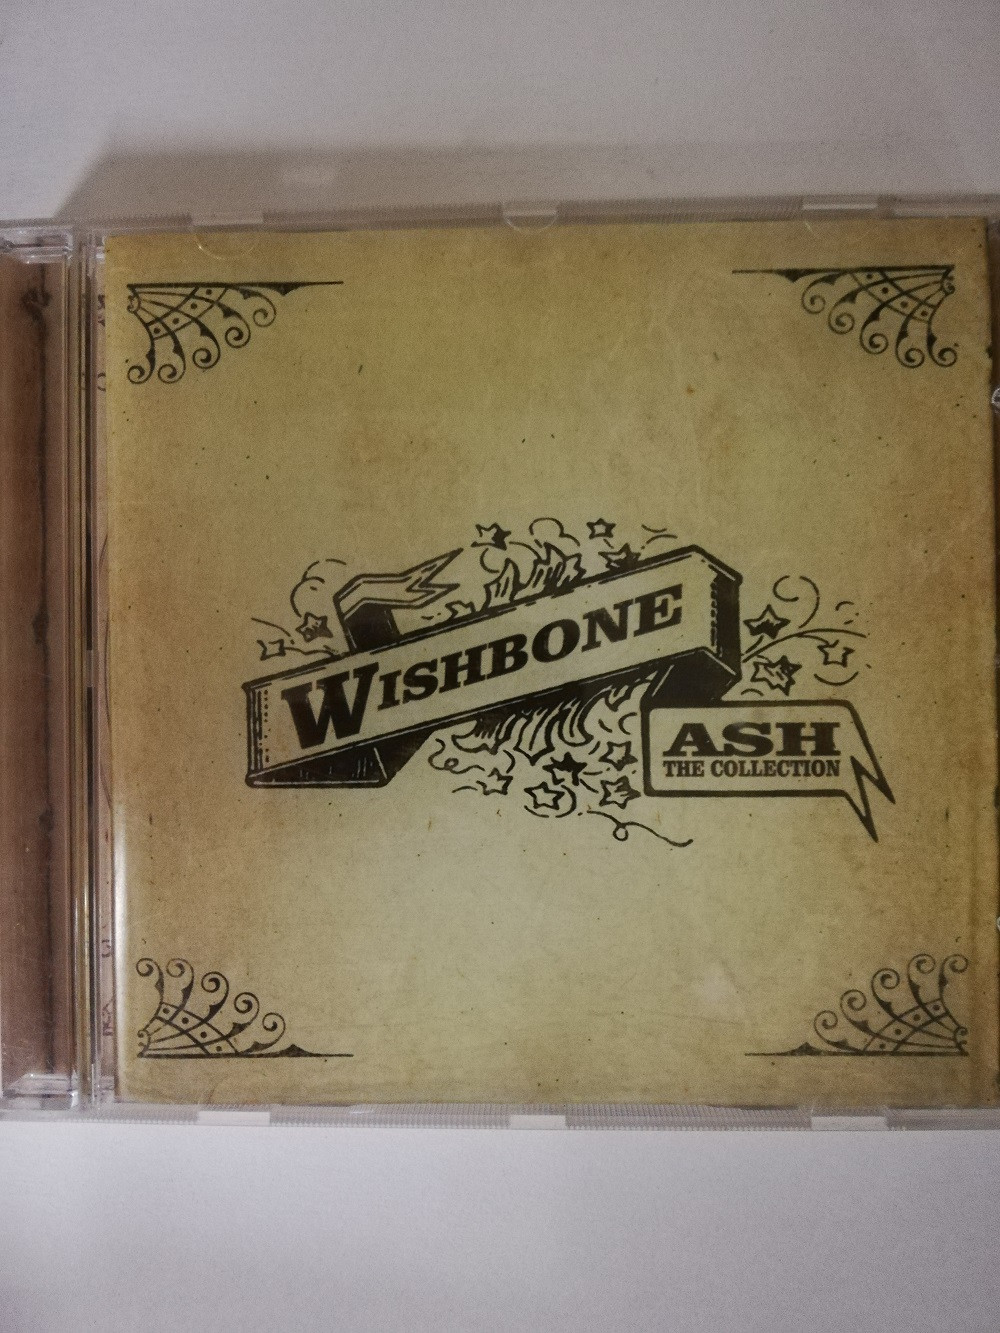 Imagen CD WISHBONE ASH - ASH THE COLLECTION